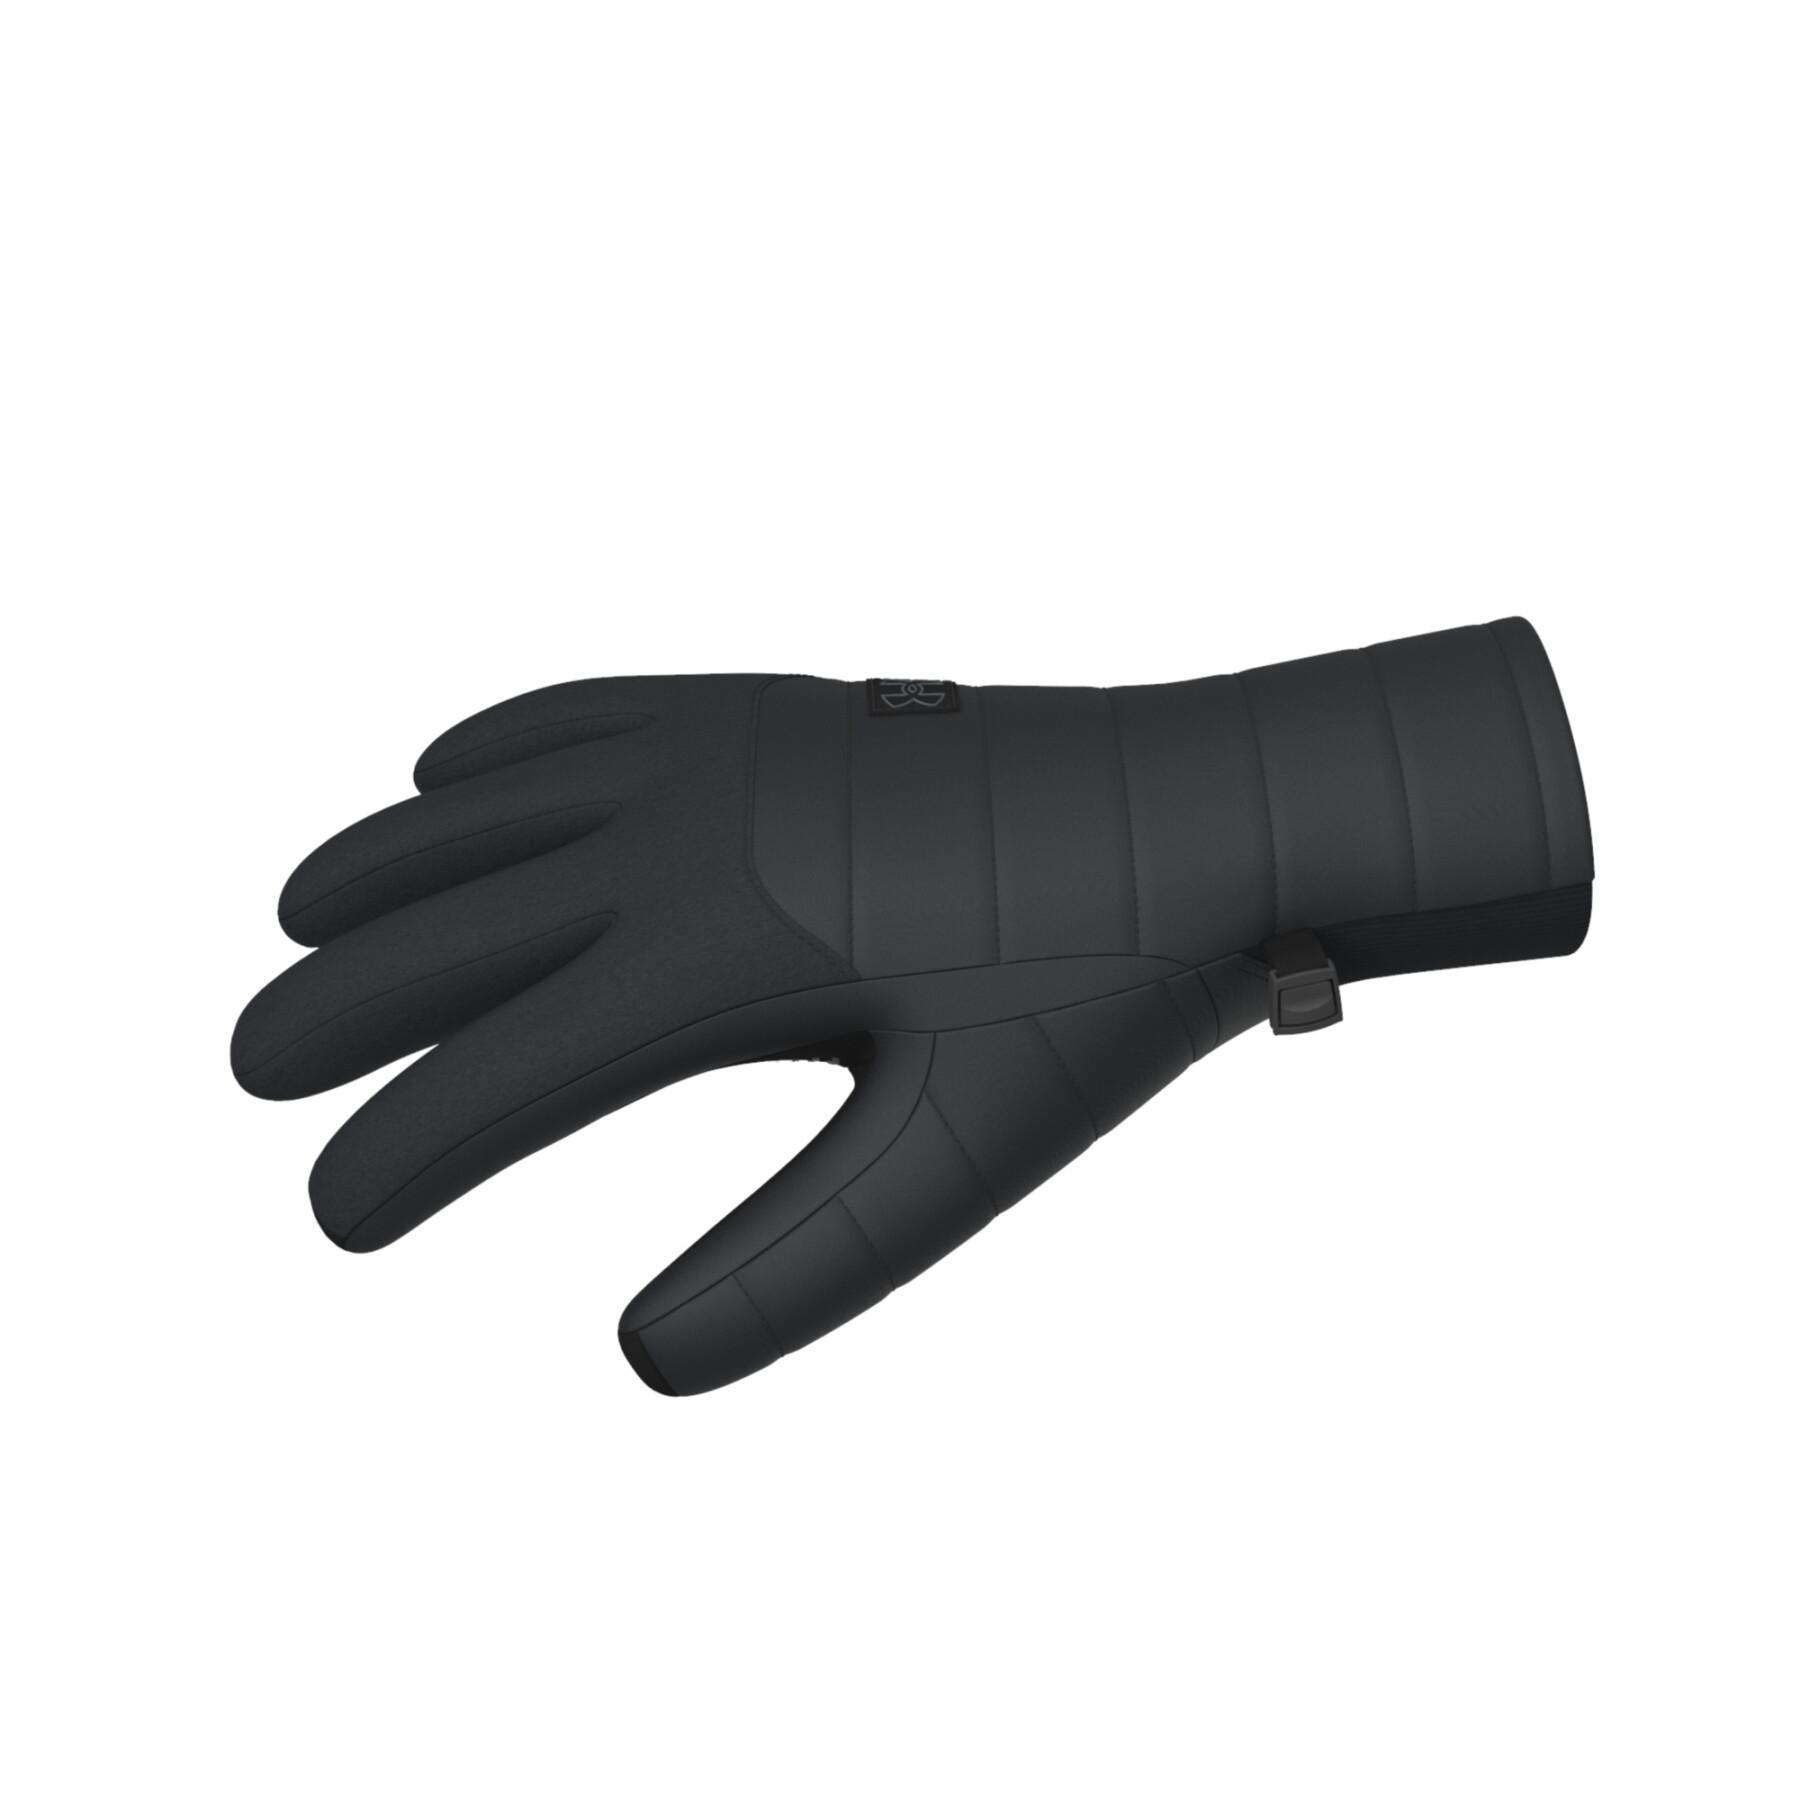 Gants Under Armour Storm insulated - Gants & Protections - Sports